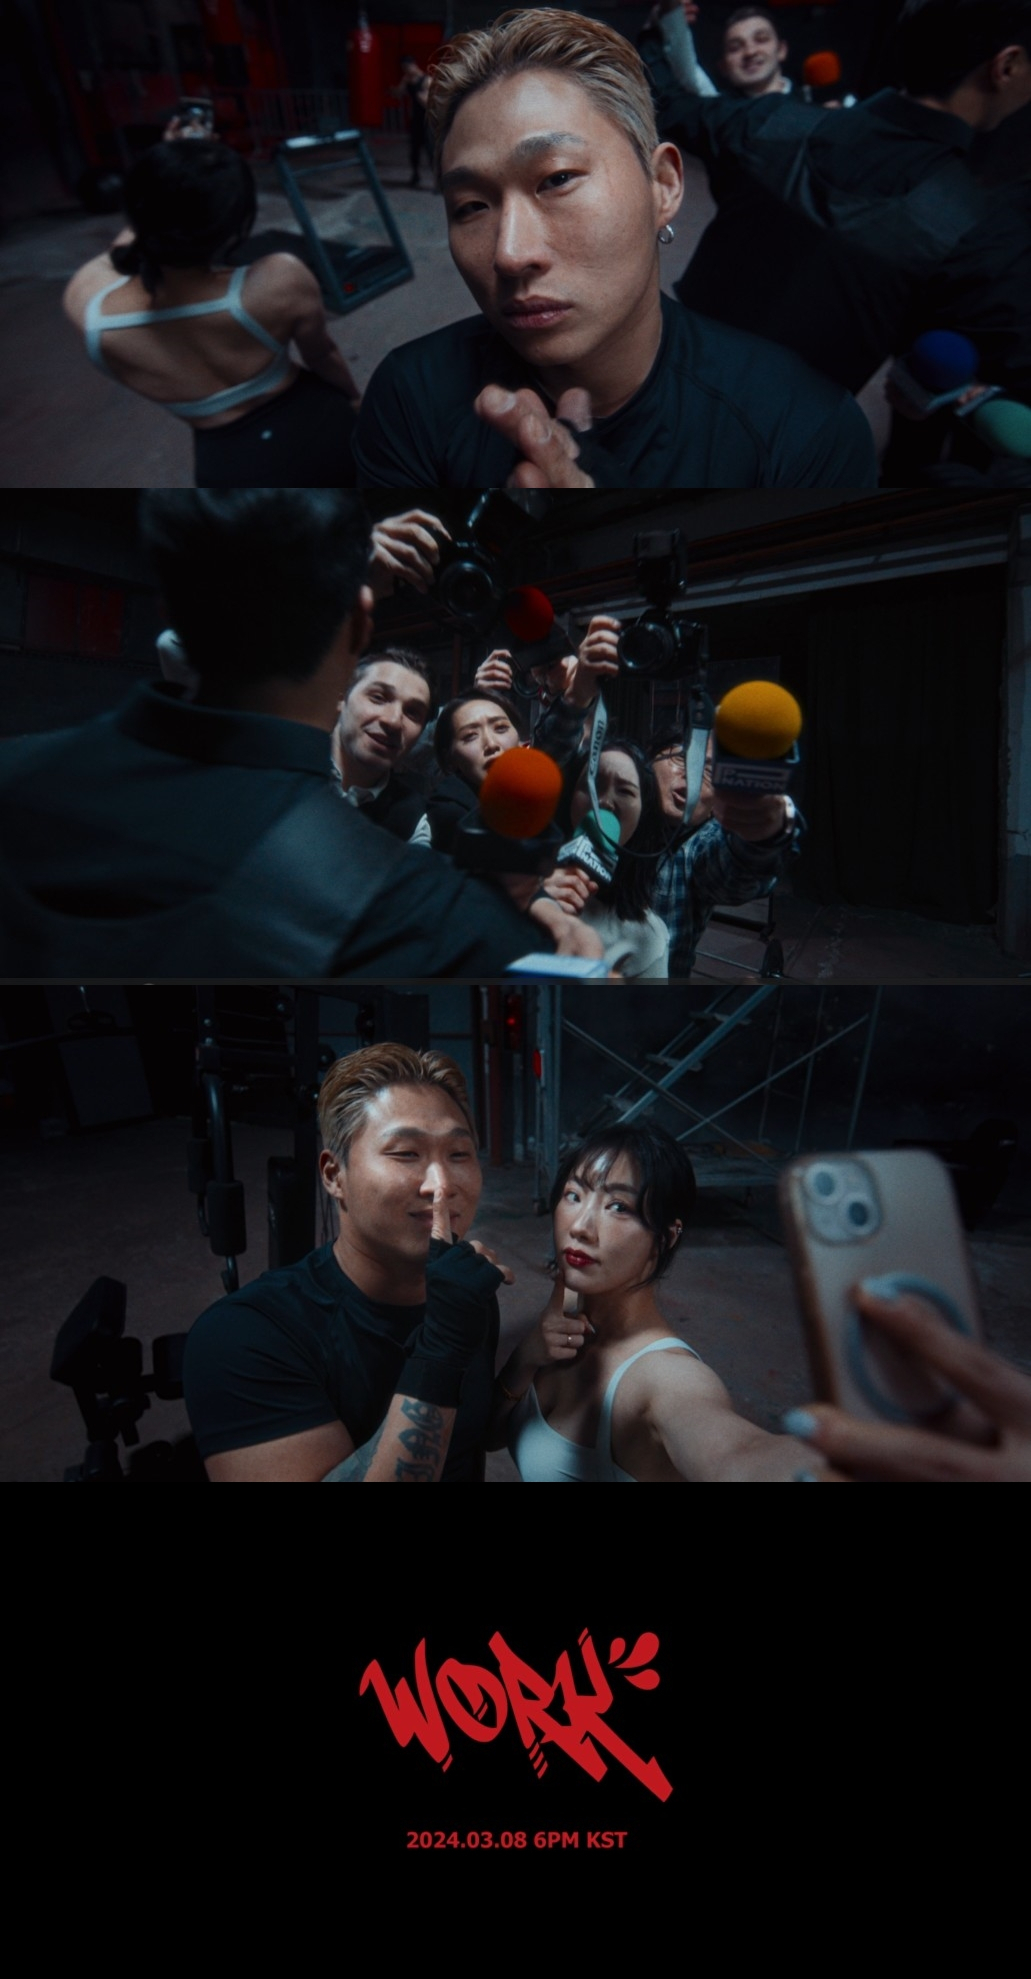 Teaser images of the music video for 